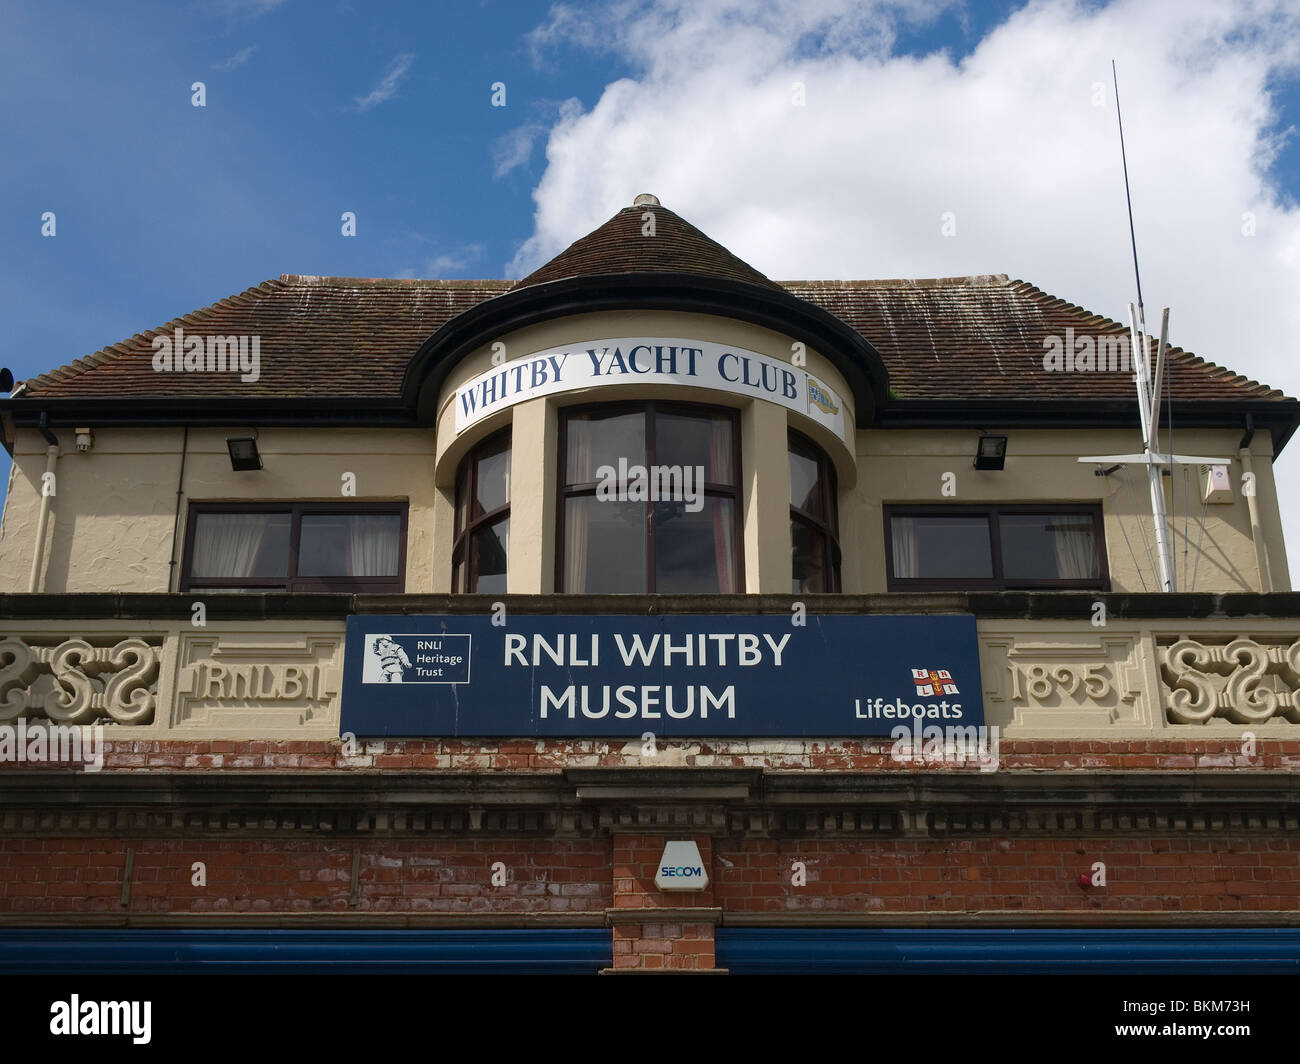 The Whitby Yacht Club overlooking the harbour upstairs from the RNLI lifeboat museum, the old life boat station built 1895 Stock Photo